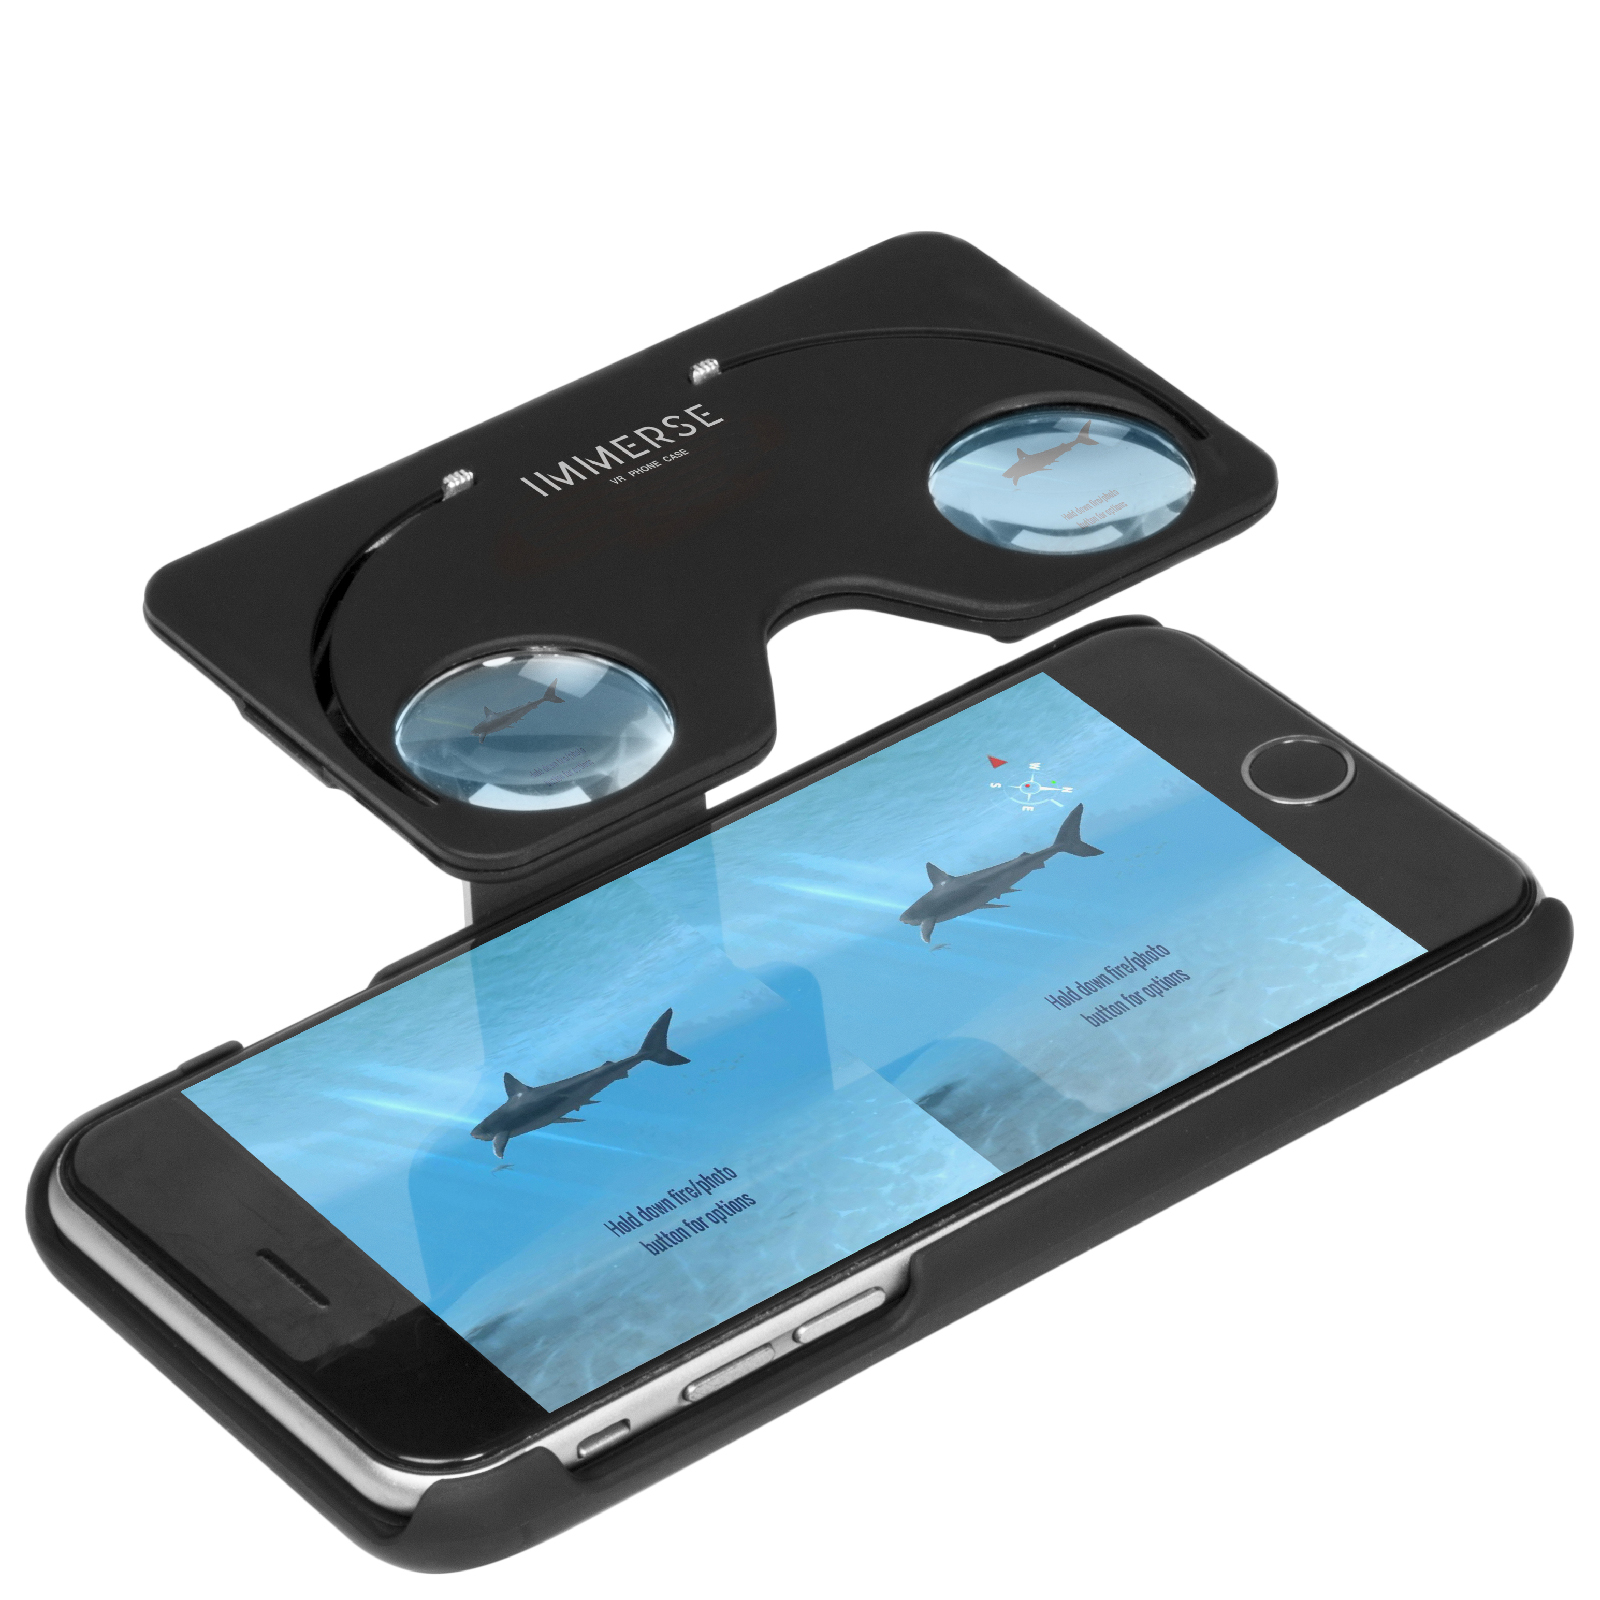 Image of Immerse VR iPhone 6 Case